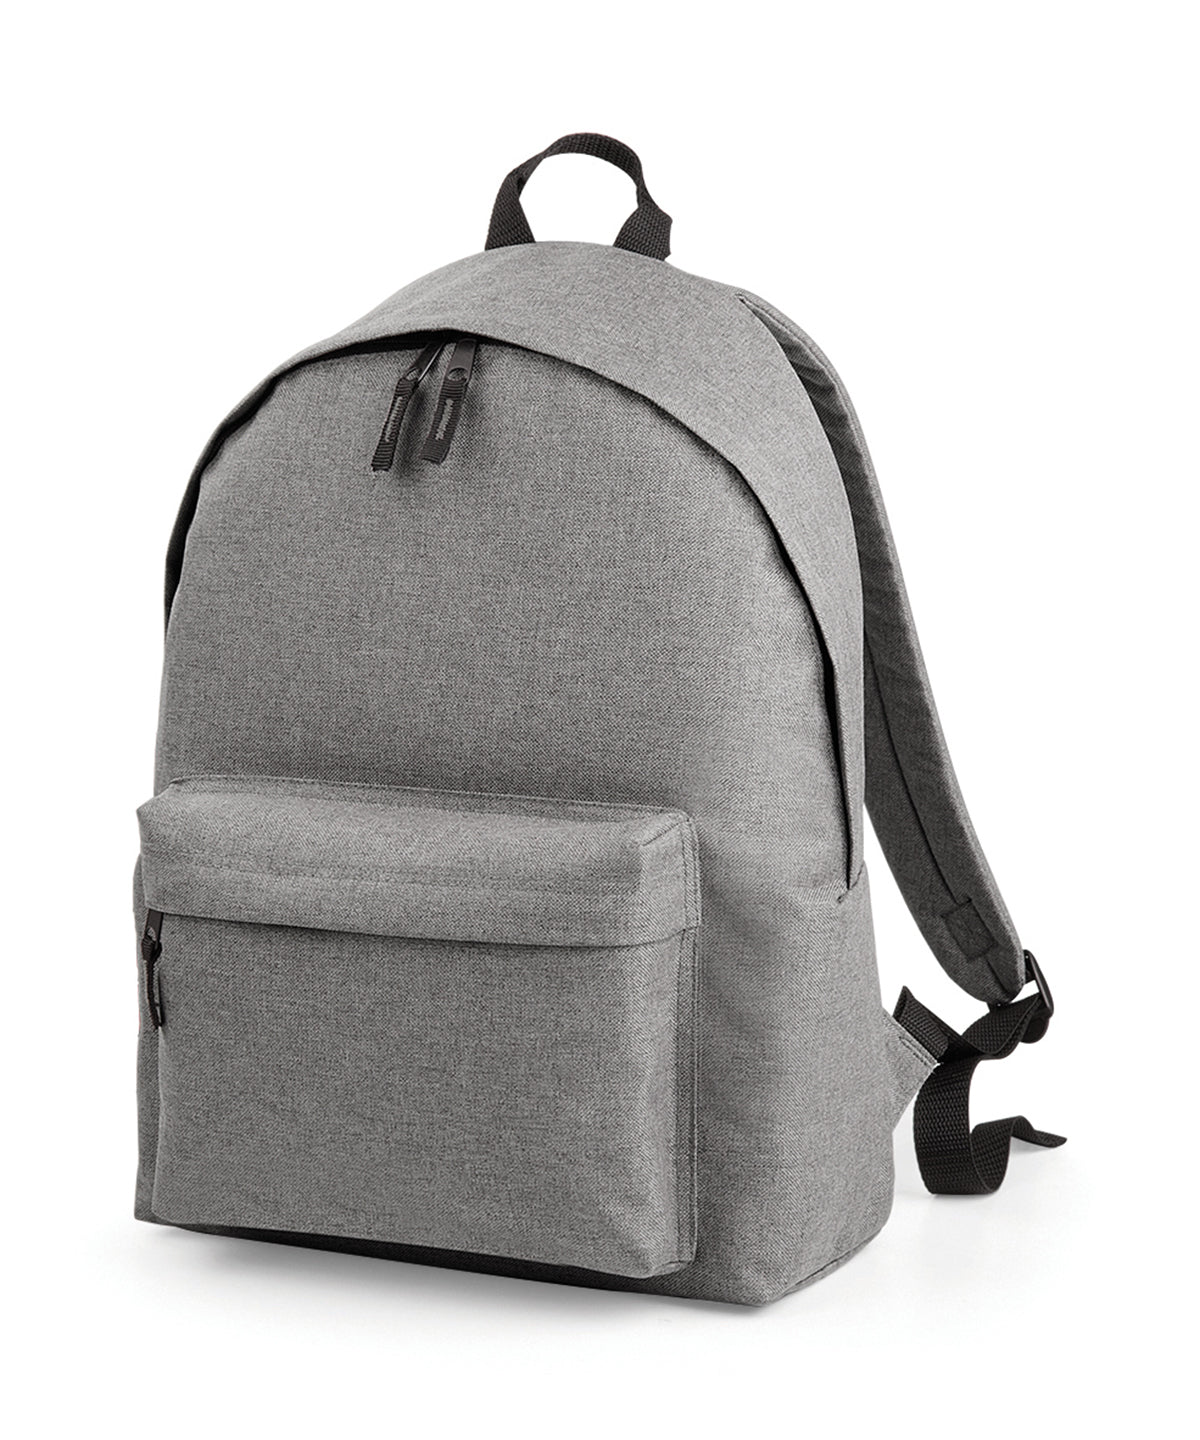 Personalised Bags - Heather Grey Bagbase Two-tone fashion backpack